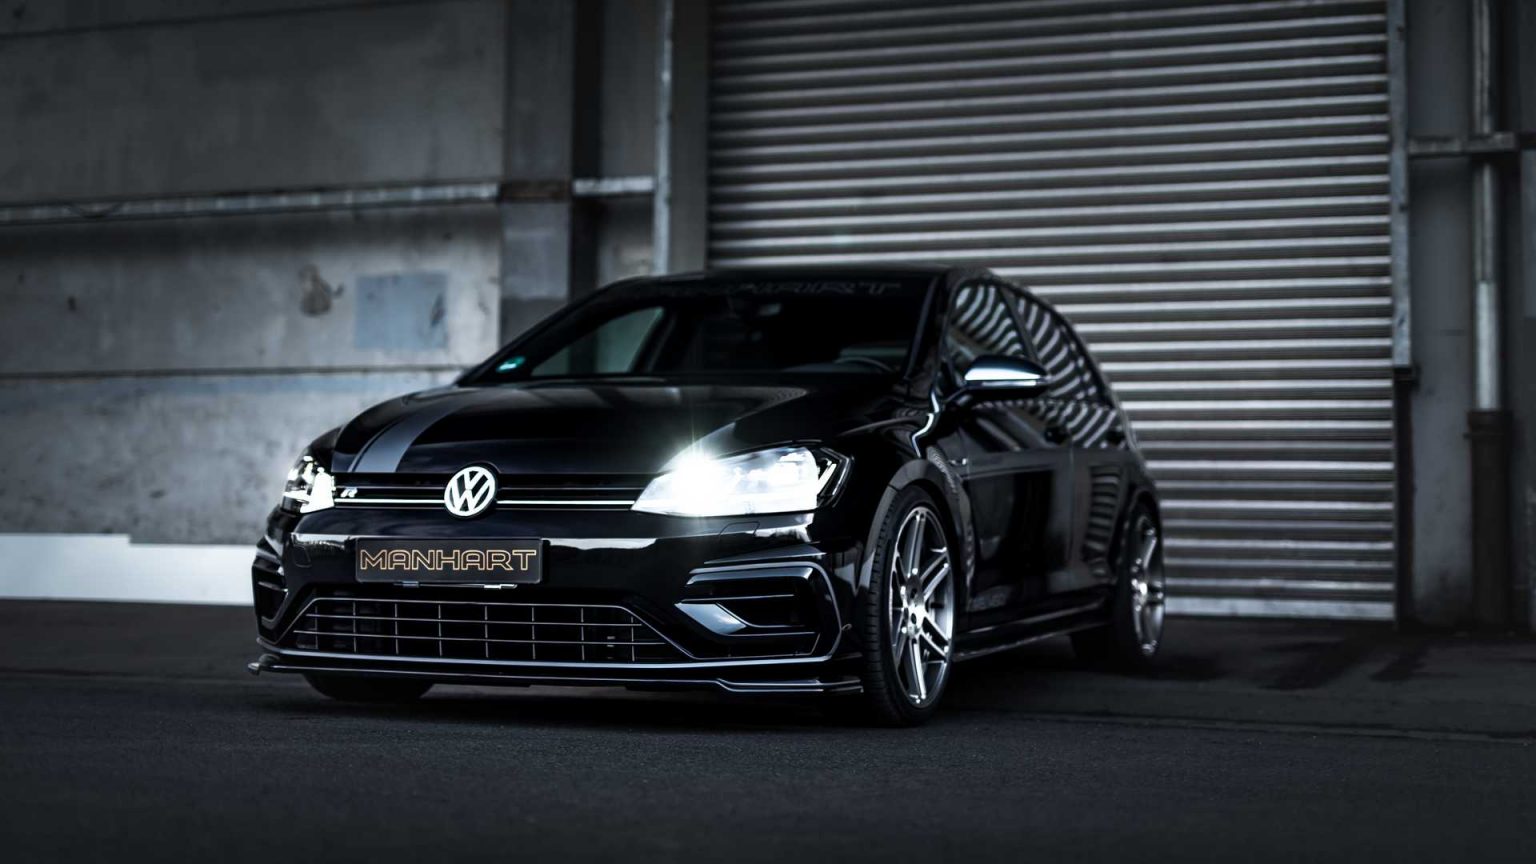 Manhart Tuned VW Golf R Pushes Out 450 HP (336 kW)